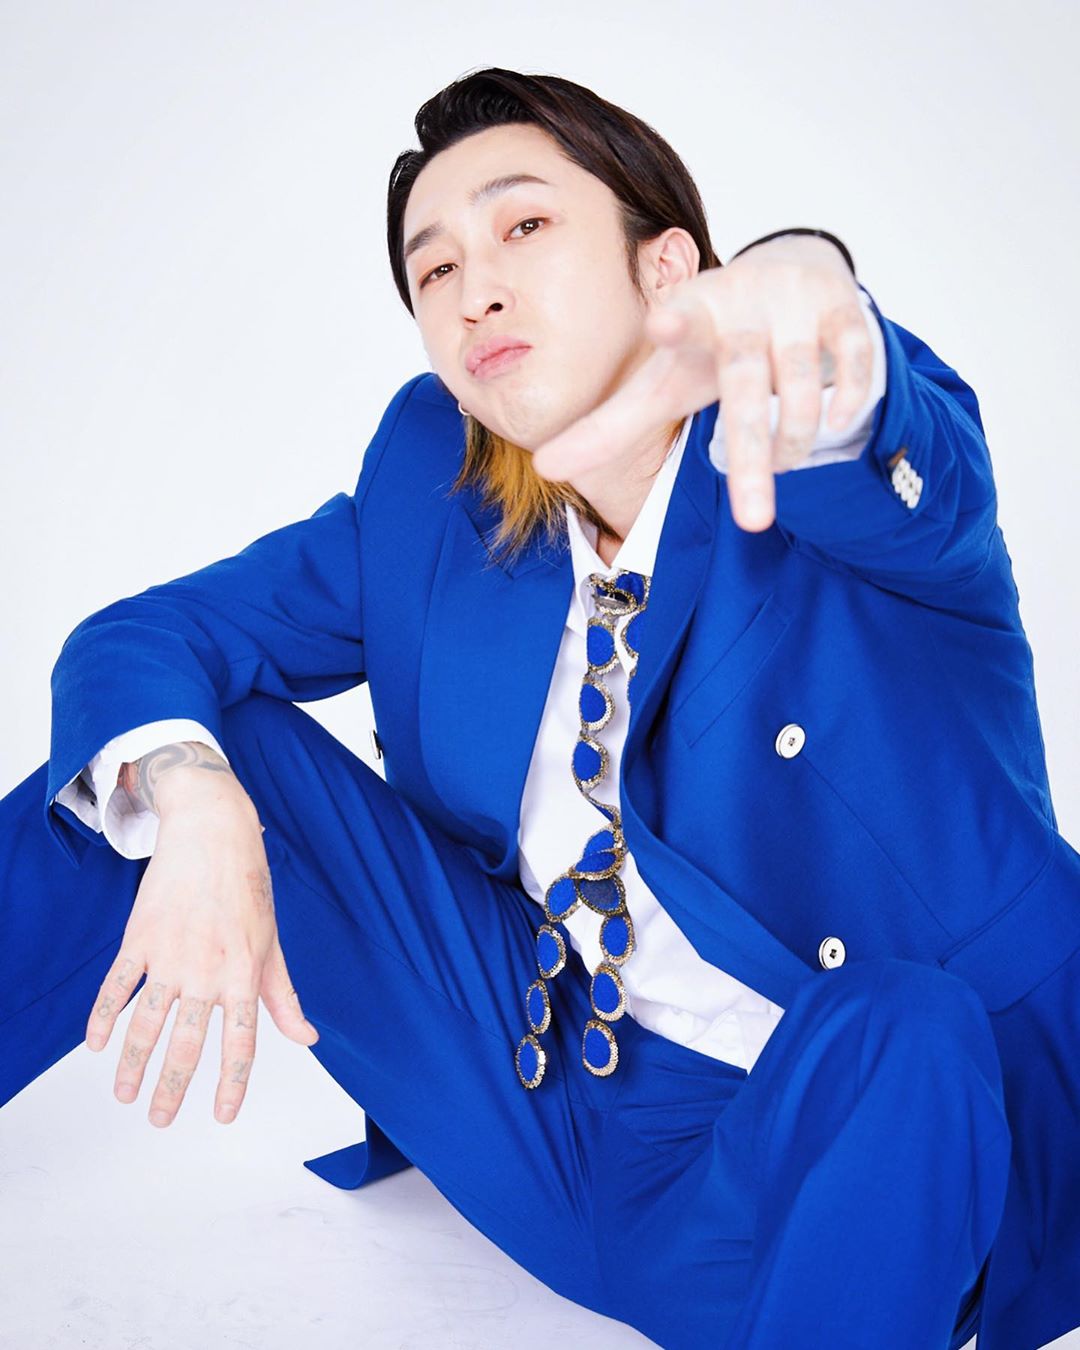 Rapper Sleepy transforms into Voice trot promotional fairySleepy posted a picture on his Instagram on the 17th with an article entitled Today # Voice trot.Sleepy in the open photo is posing in a blue suit while looking at the camera.Sleepys unique hairstyle and confident expression capture the attention of viewers.Sleepy stars in MBN entertainment Voice trotPhoto: Sleepy Instagram